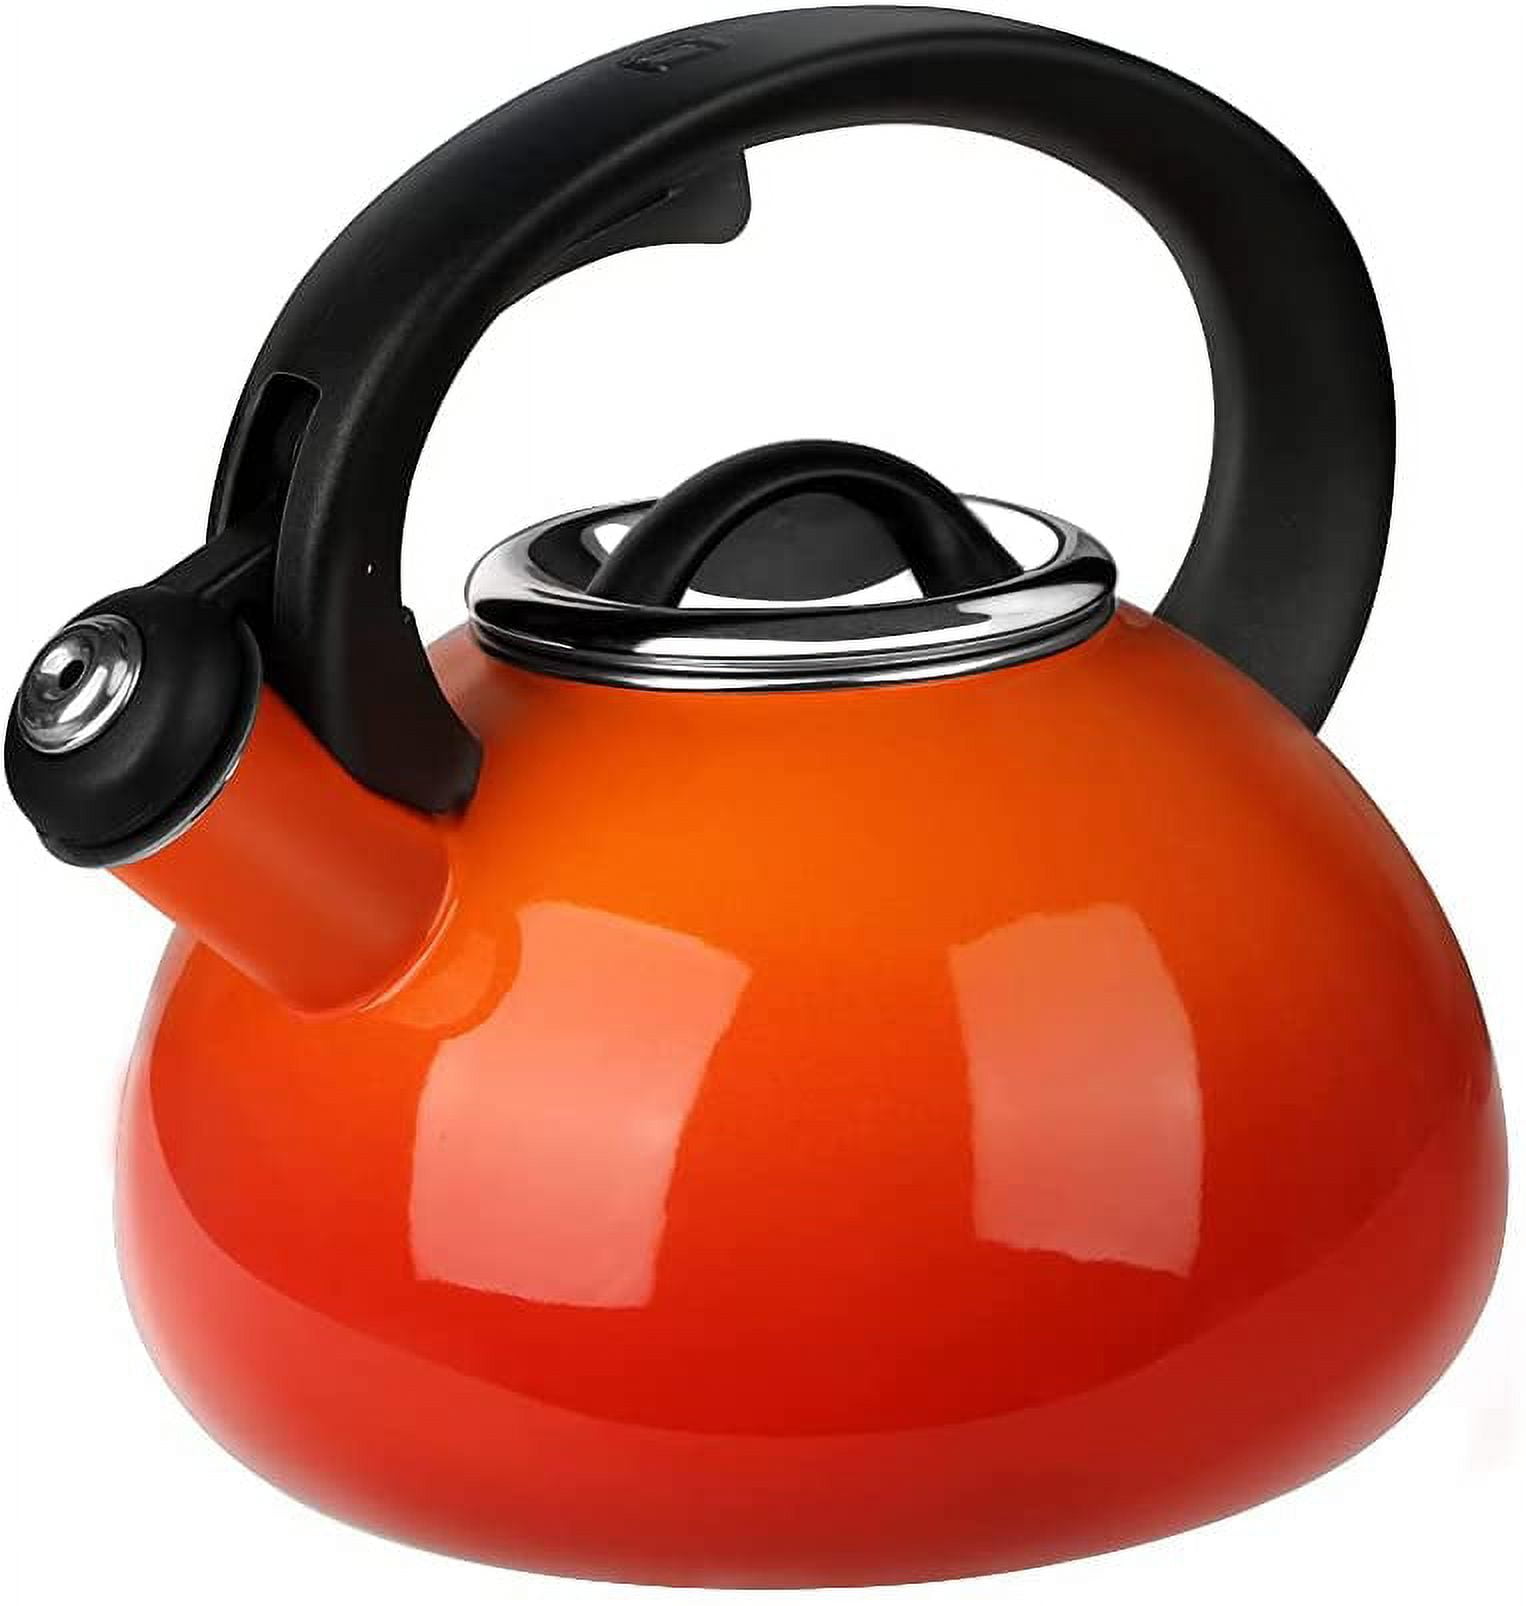 Hot Water Boiler Whistling Tea Kettle for Stovetop Heating Water Kitchen